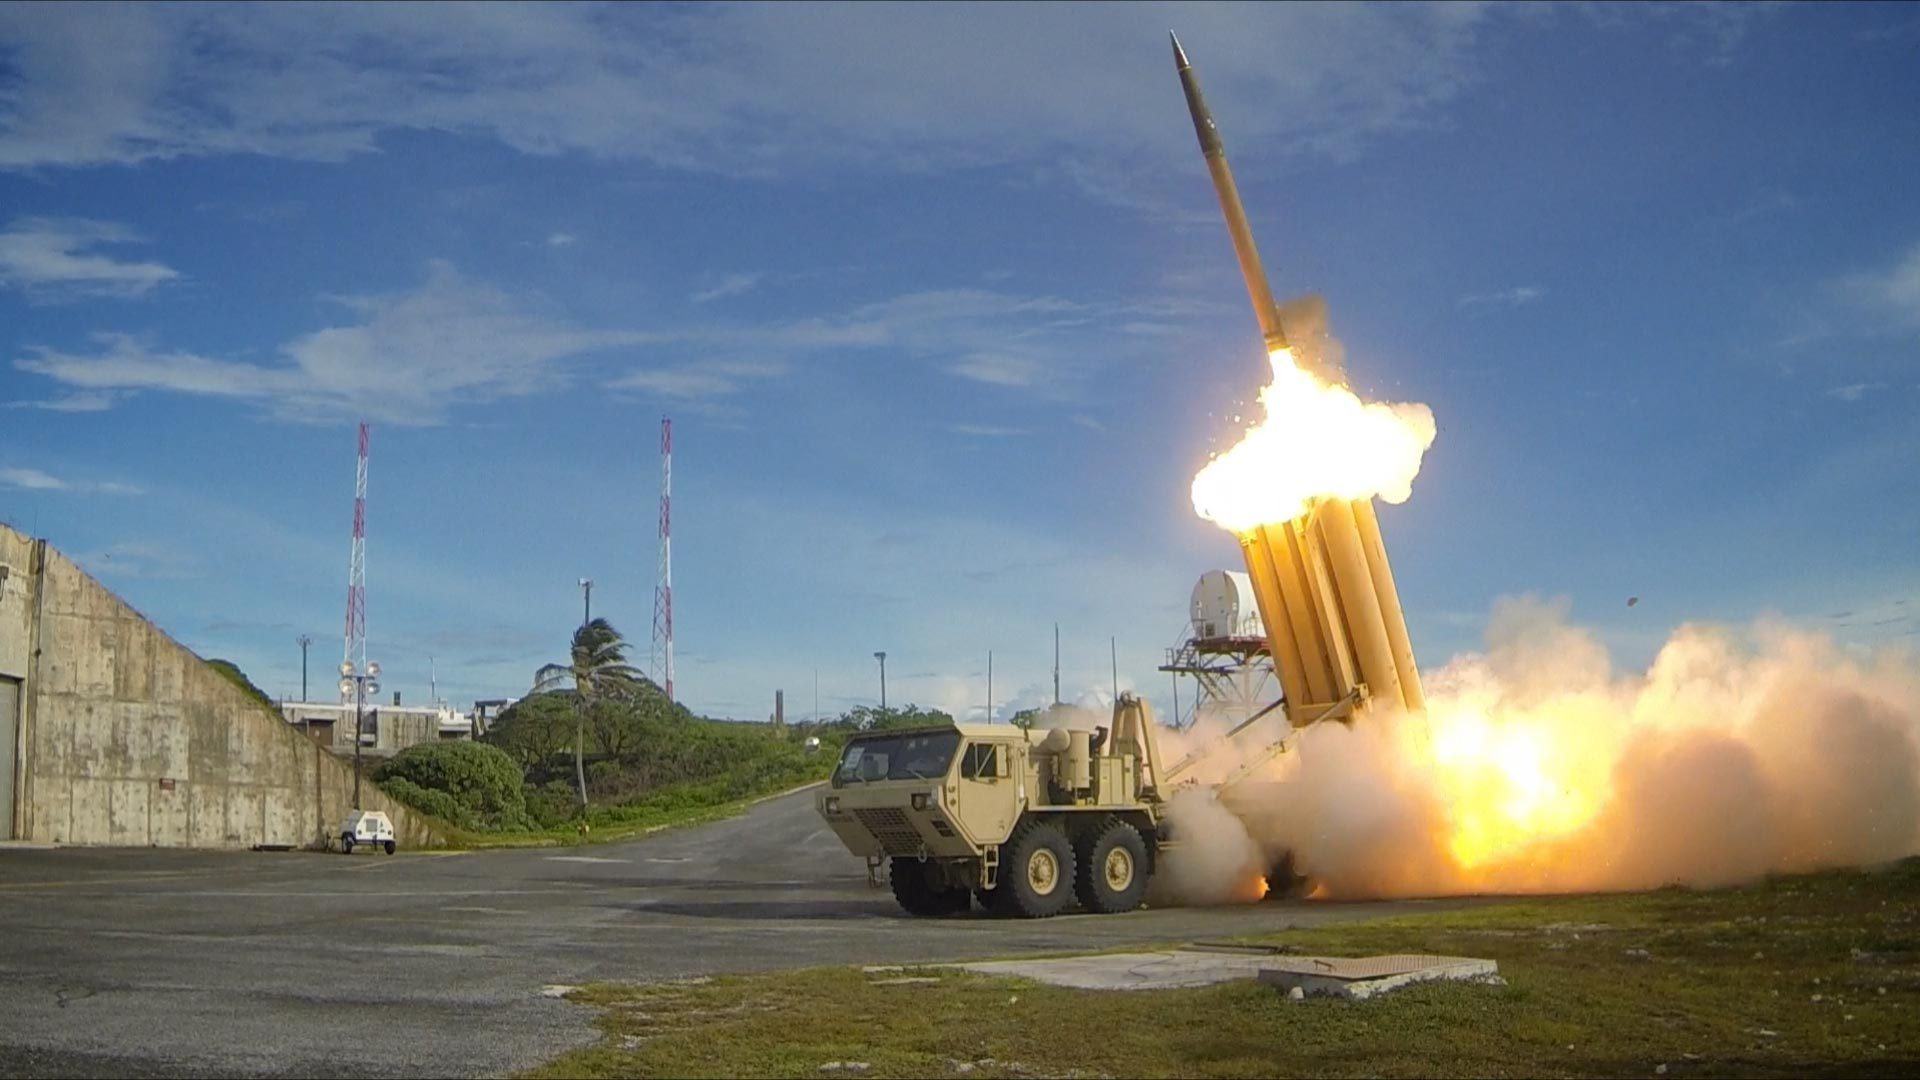 The_first_of_two_Terminal_High_Altitude_Area_Defense_%28THAAD%29_interceptors_is_launched_during_a_successful_intercept_test_-_US_Army.jpg